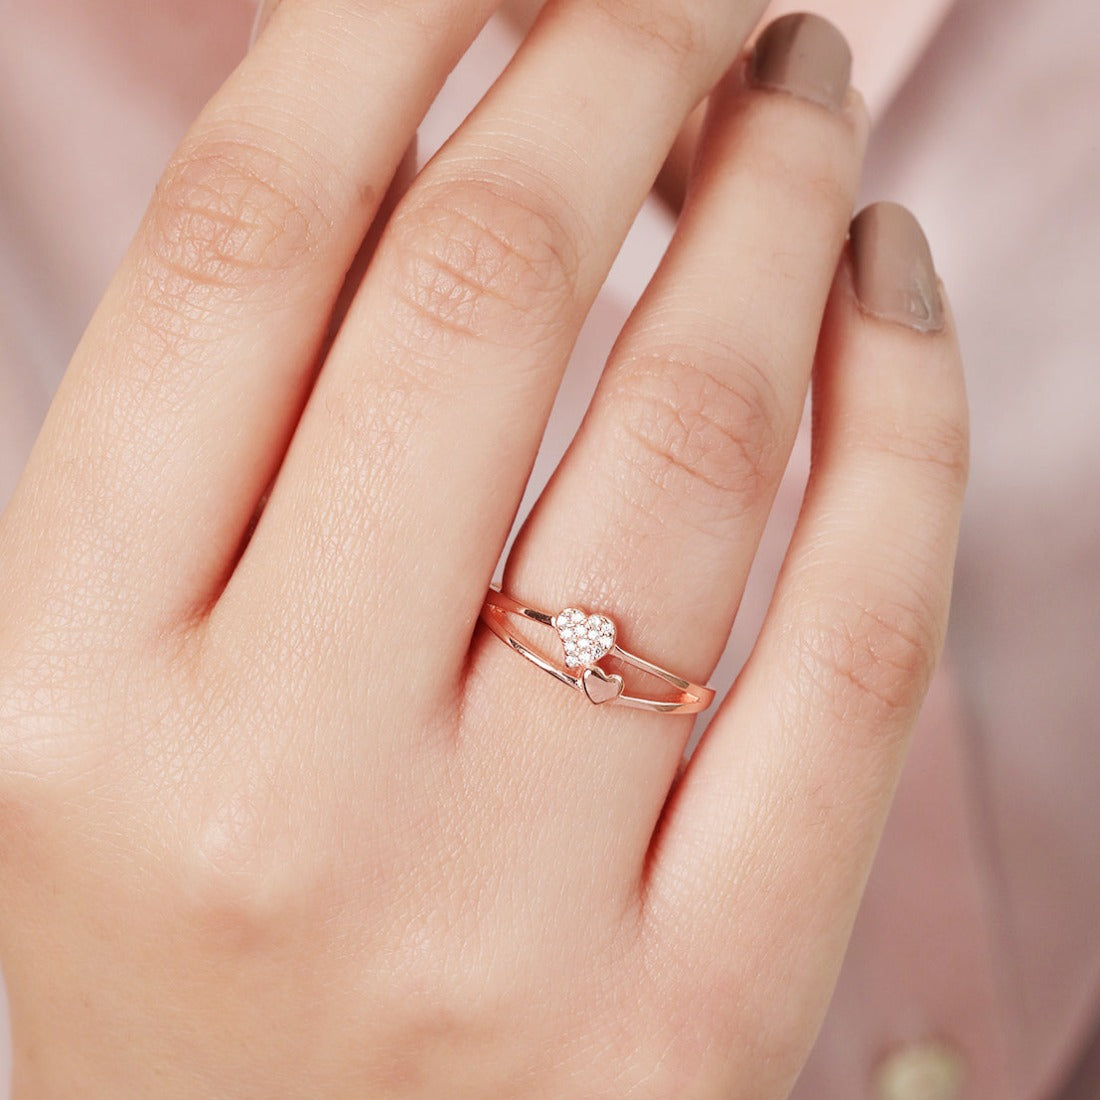 Dual Heartbeat Rose gold-plated 925 Sterling Silver ring for Her (Adjustable)